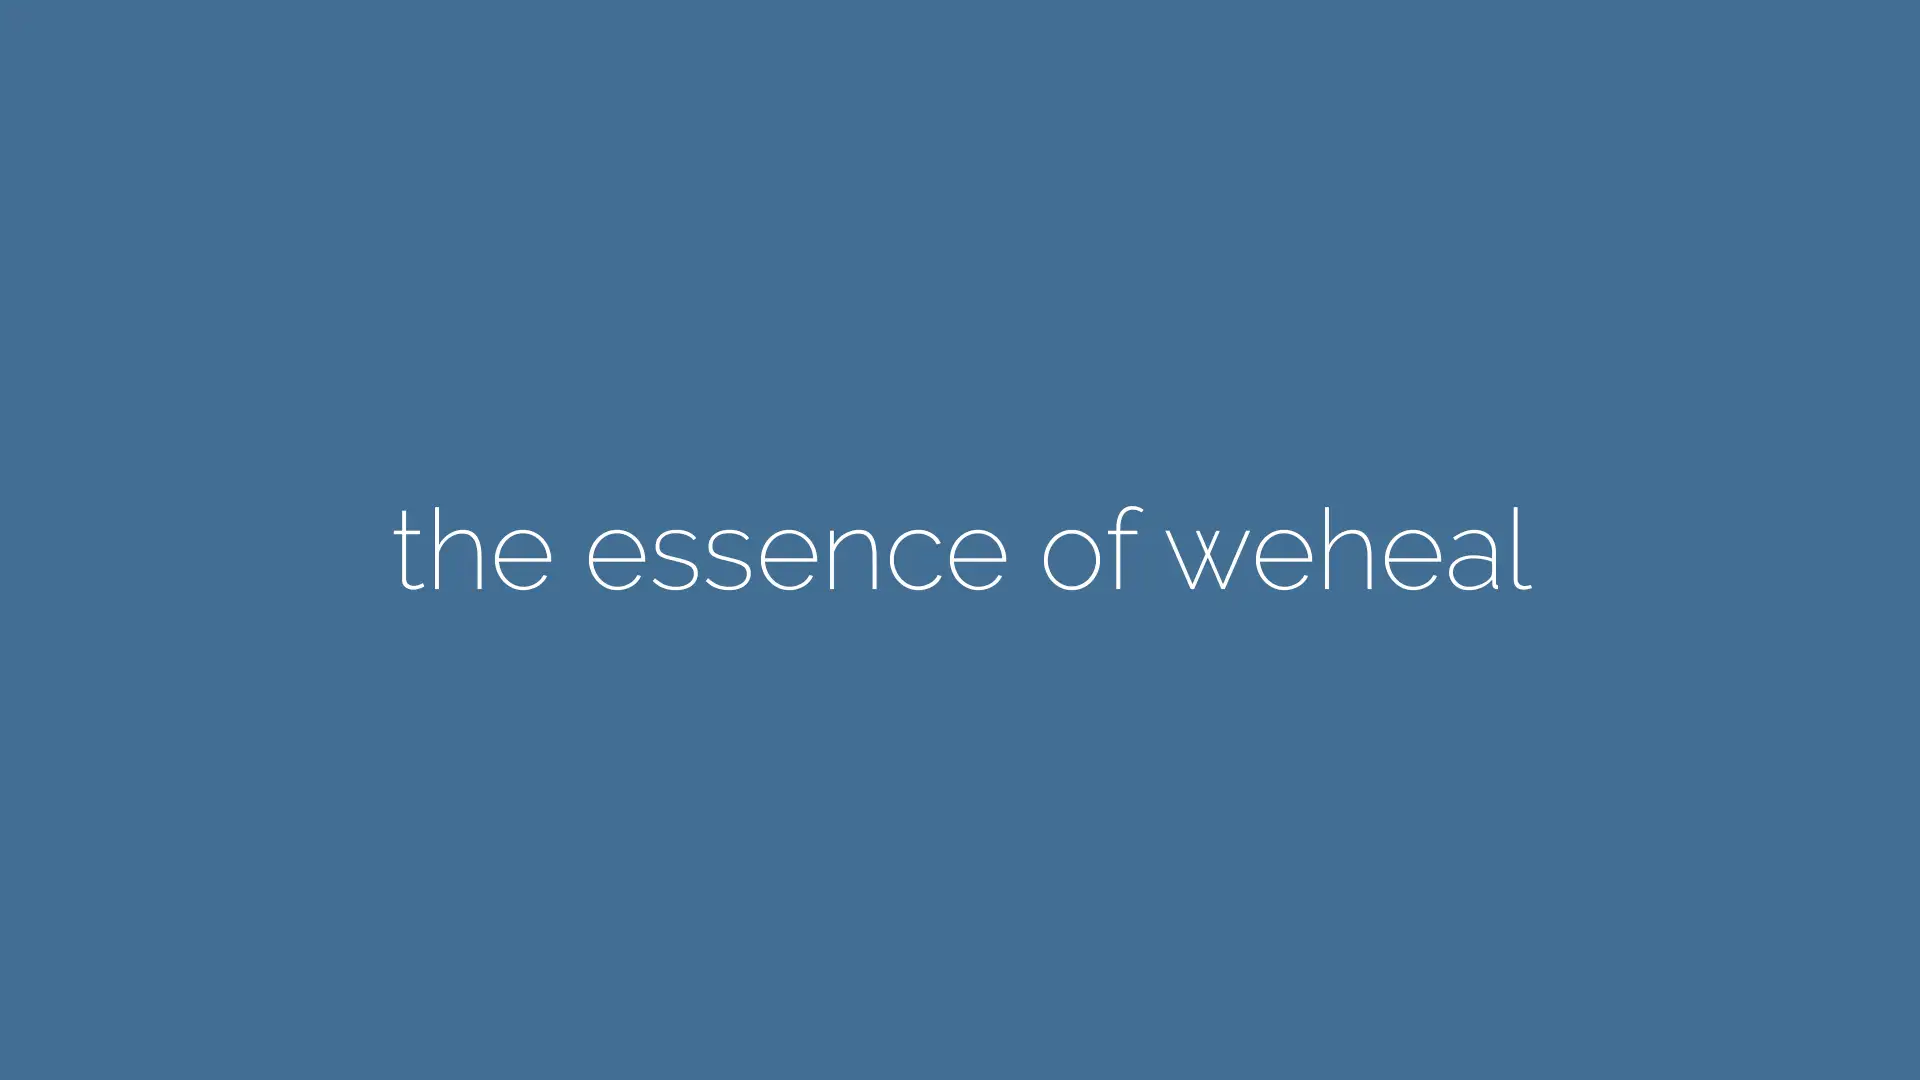 Featured image for “essence of weheal”